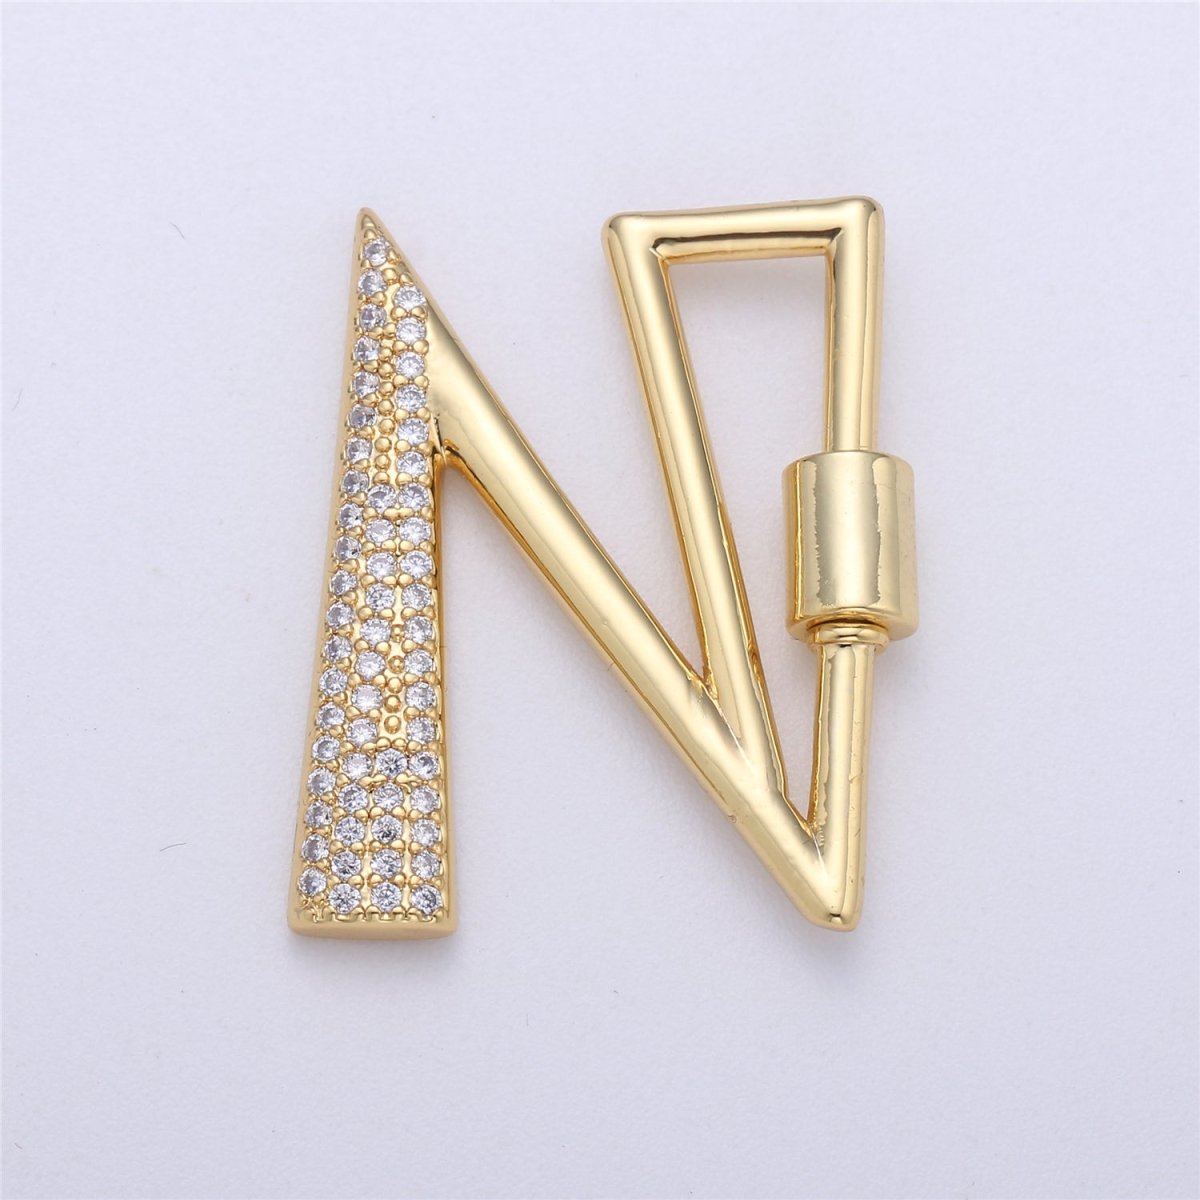 24K Gold-Plated Letter "N" Carabiner with Pave Zirconia Rhinestones, Circle Screw Clasp - DLUXCA